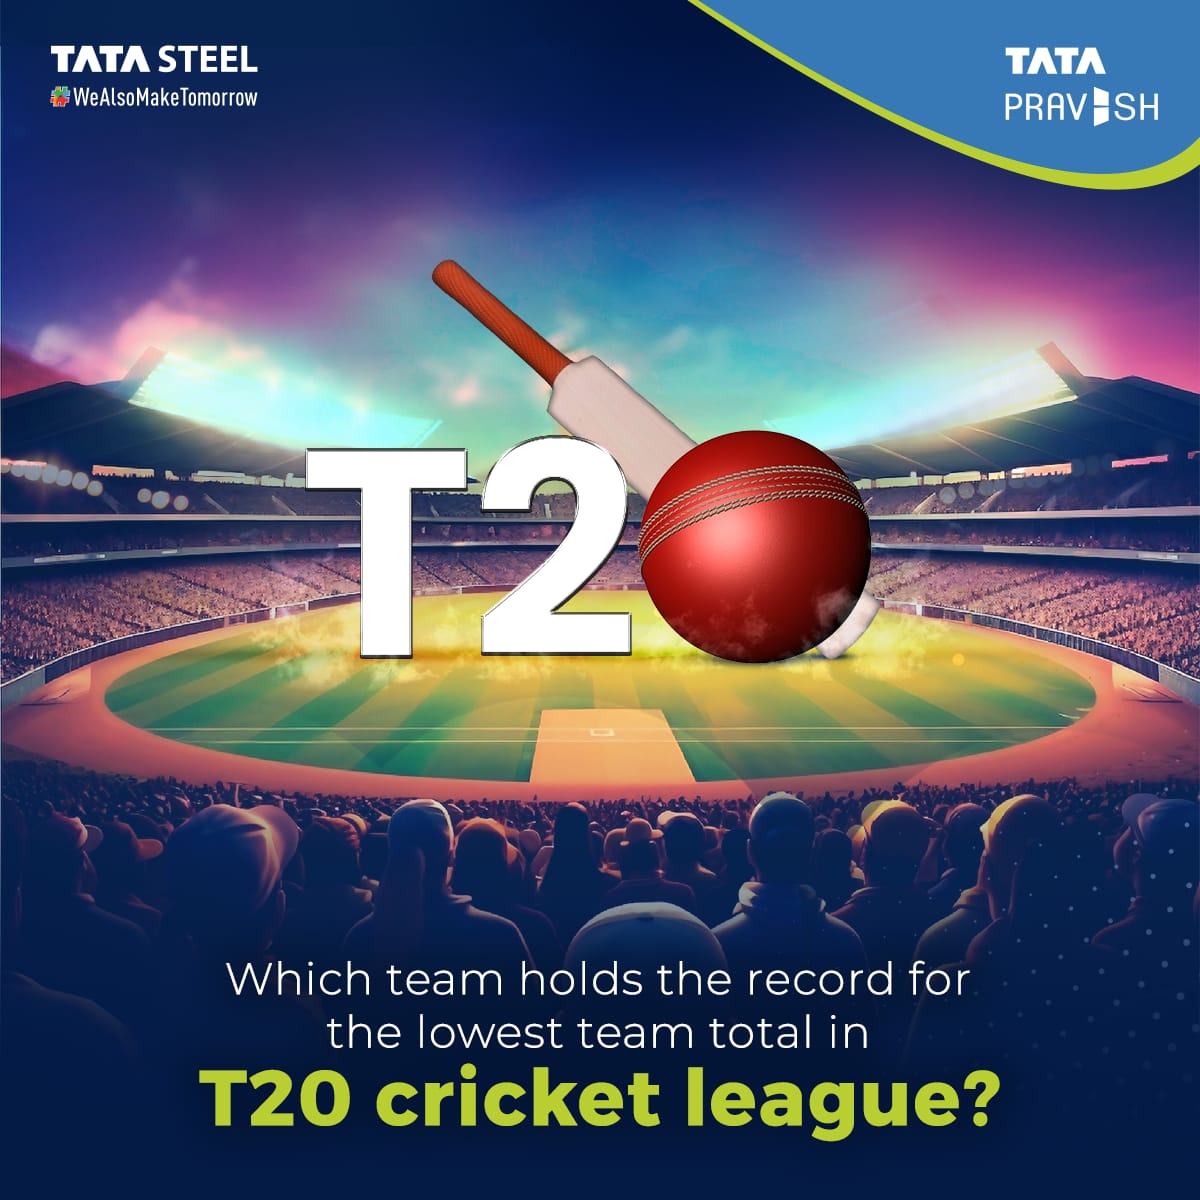 Think you know cricket inside out? Get ready to put your cricket knowledge to the test and win exciting rewards! Don't miss this chance to showcase your expertise. . . #TataPravesh #AkelaHiKaafiHai #CricketQuiz #Safety #TataPraveshDoors #AHKH #Contest #Challenge #ContestAlert